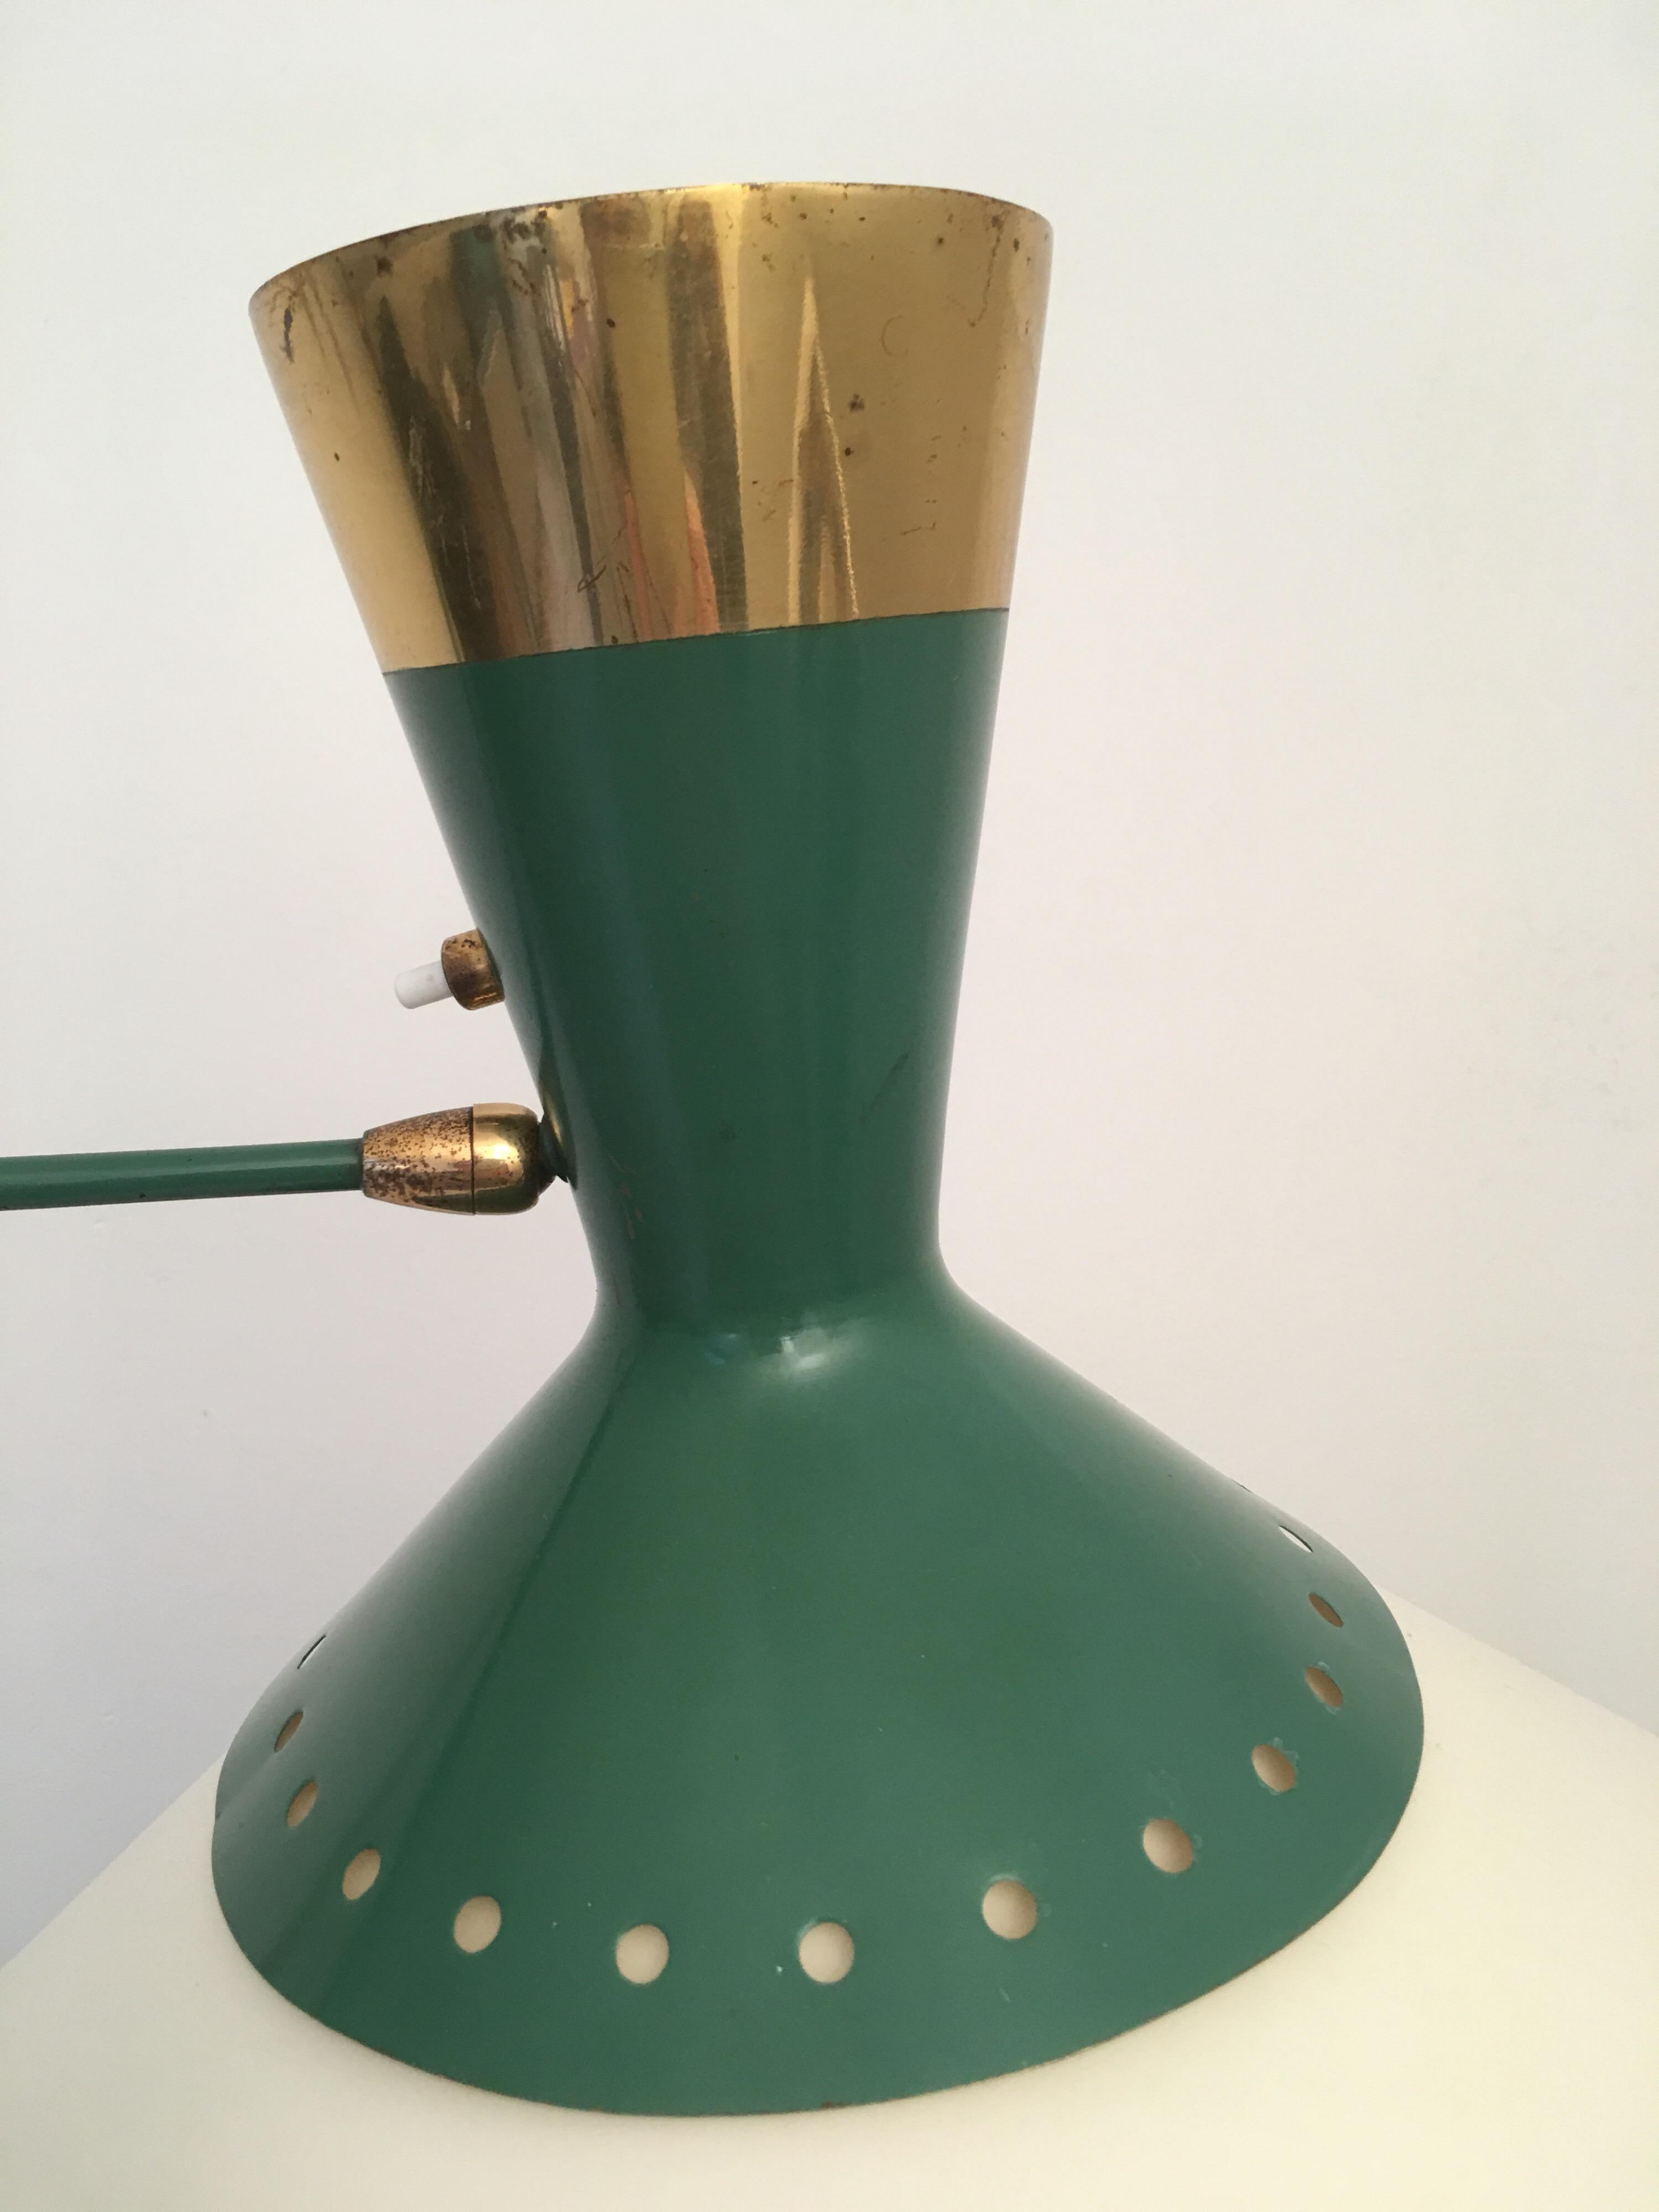 Arlus Green and Gilt Counter Balance Swing Arm Wall Lamp, French 1950s For Sale 5